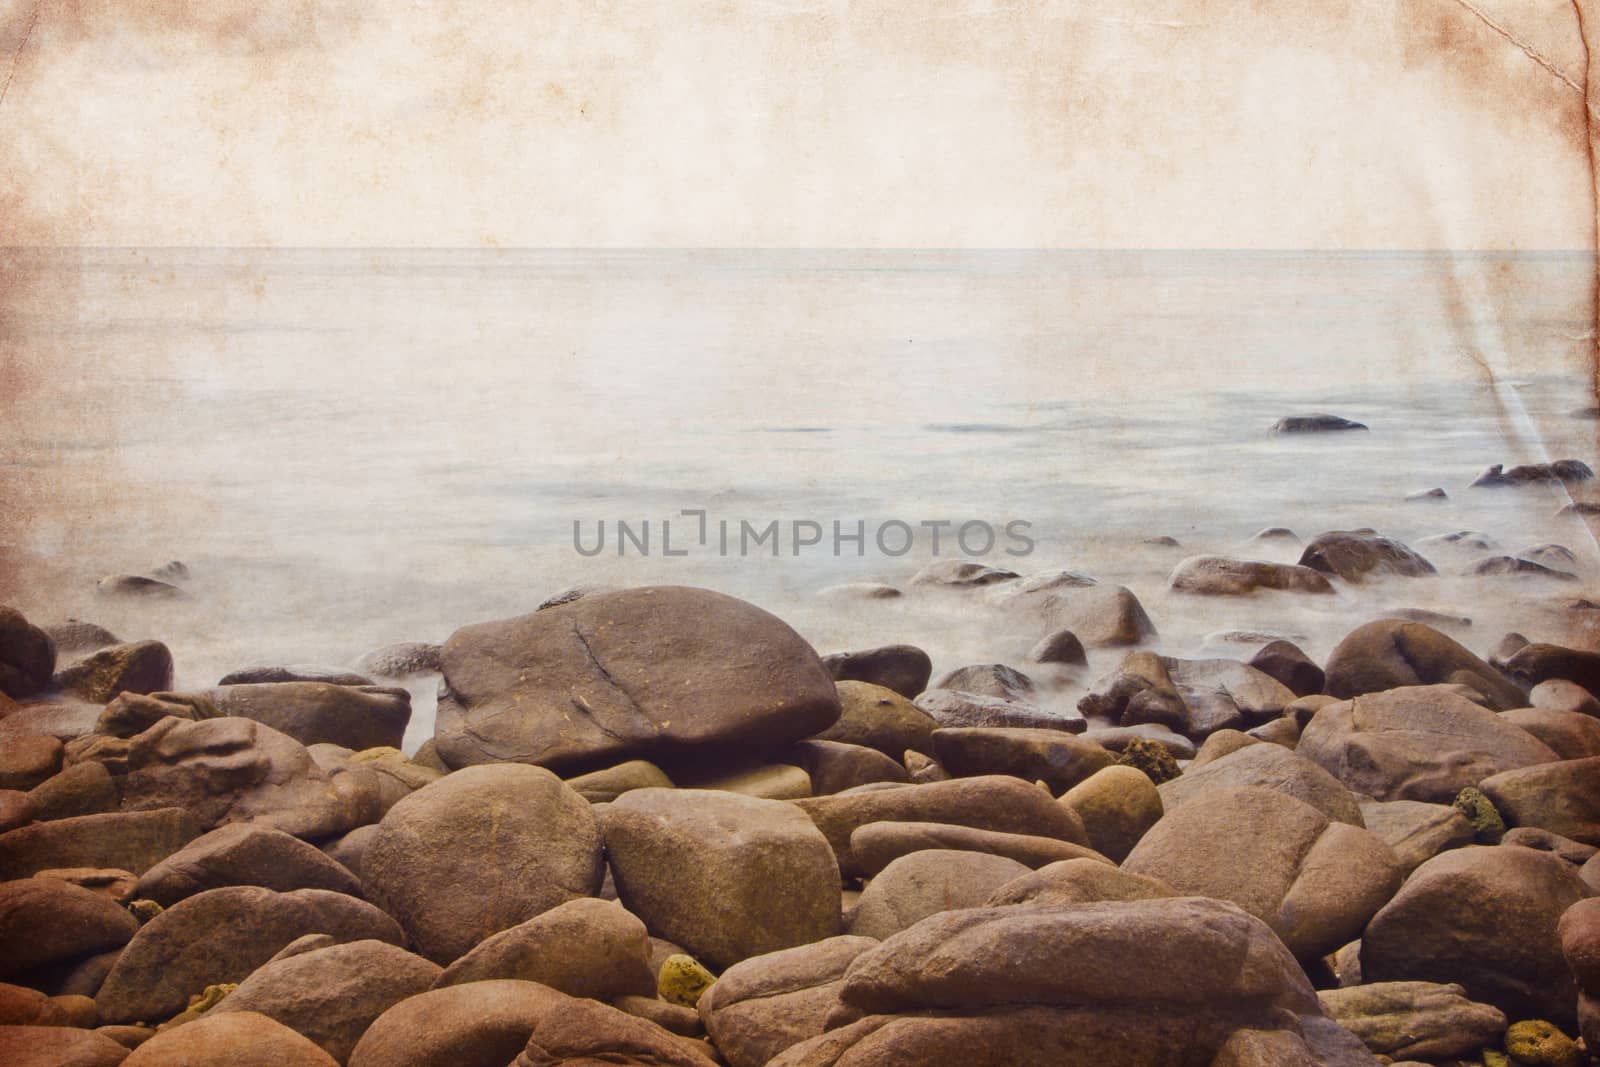 Ocean and rocky coast in retro grunge style for background